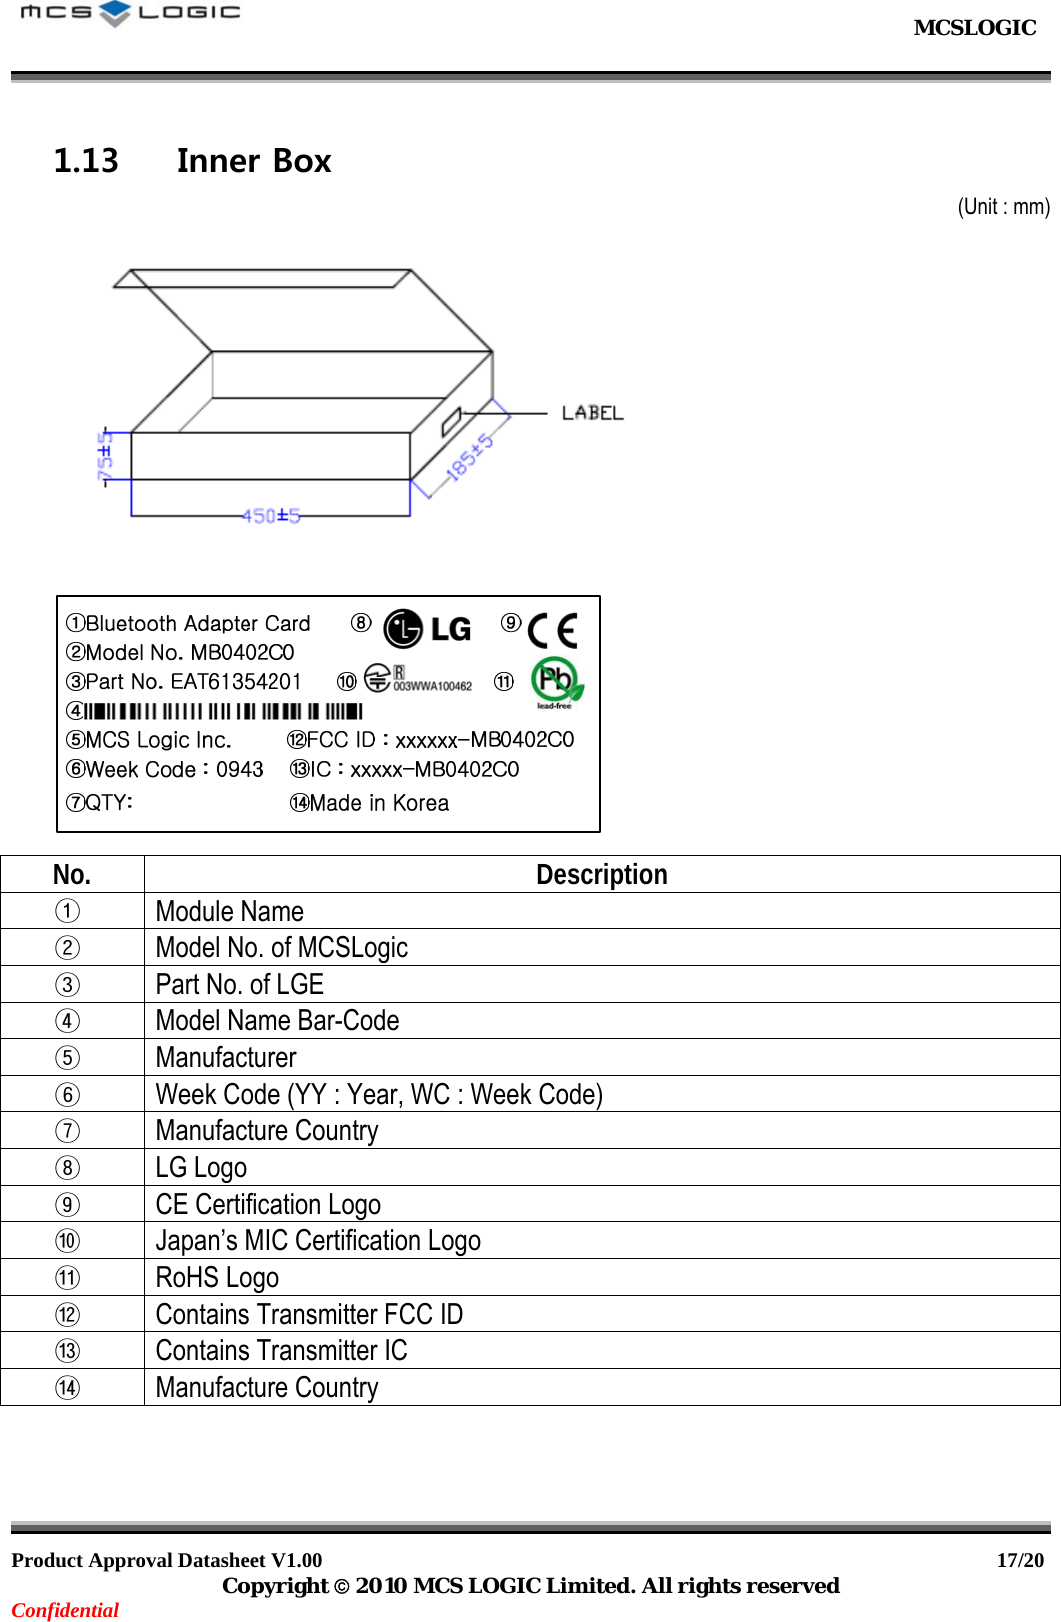                                                           MCSLOGIC                                                                                     Product Approval Datasheet V1.00                                                                  17/20 Copyright © 2010 MCS LOGIC Limited. All rights reserved Confidential 1.13 Inner Box (Unit : mm)    No. Description ①  Module Name ②  Model No. of MCSLogic ③  Part No. of LGE ④  Model Name Bar-Code ⑤  Manufacturer ⑥  Week Code (YY : Year, WC : Week Code) ⑦  Manufacture Country ⑧  LG Logo ⑨  CE Certification Logo ⑩  Japan’s MIC Certification Logo ⑪  RoHS Logo ⑫  Contains Transmitter FCC ID ⑬  Contains Transmitter IC ⑭  Manufacture Country 